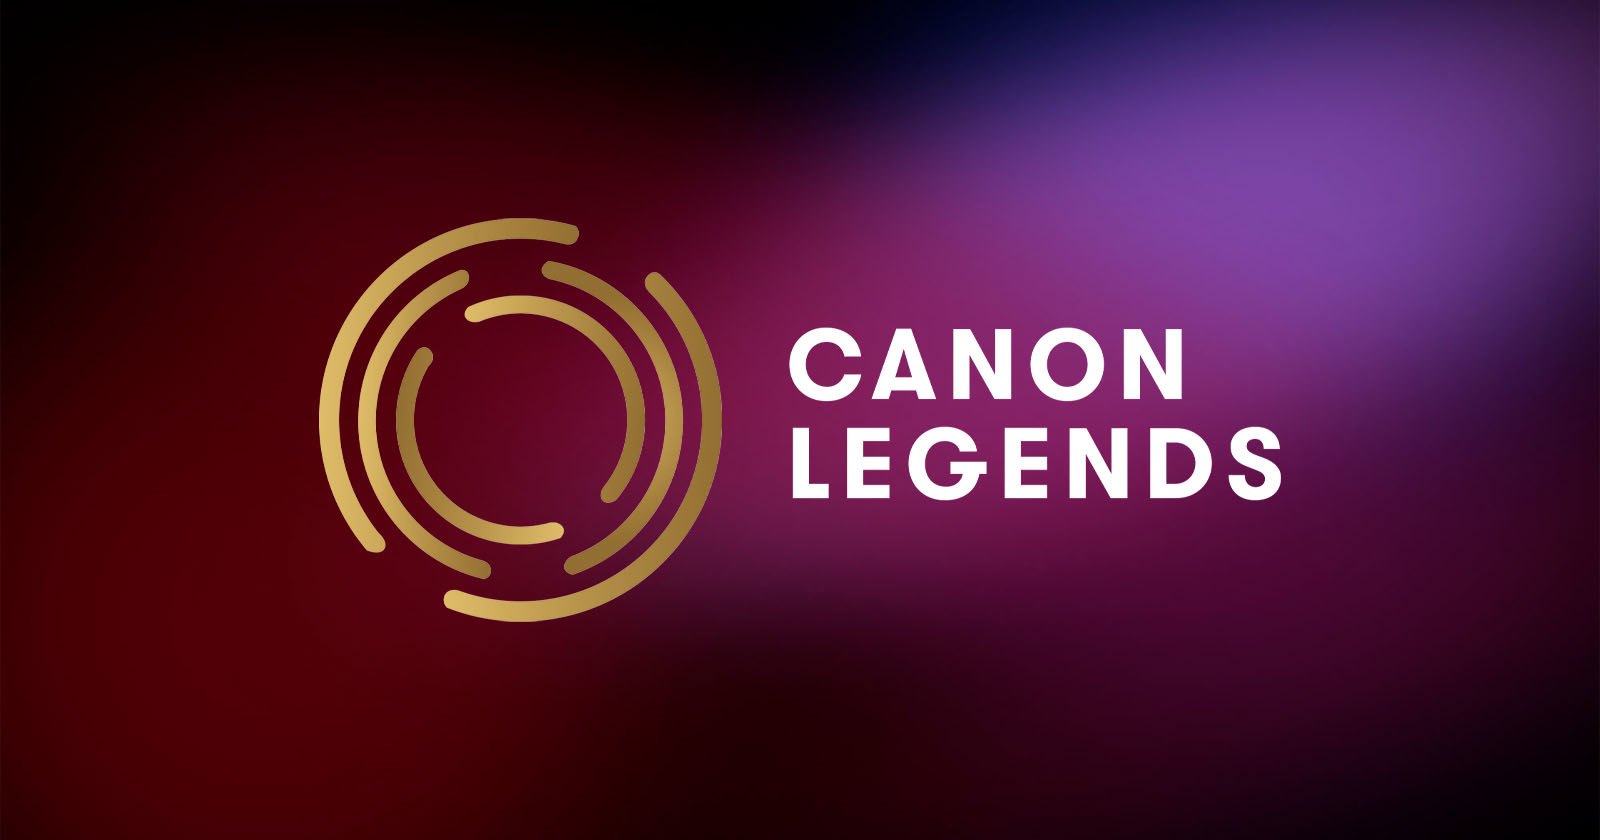 Canons Legends Photographers are Selling Photos as NFTs